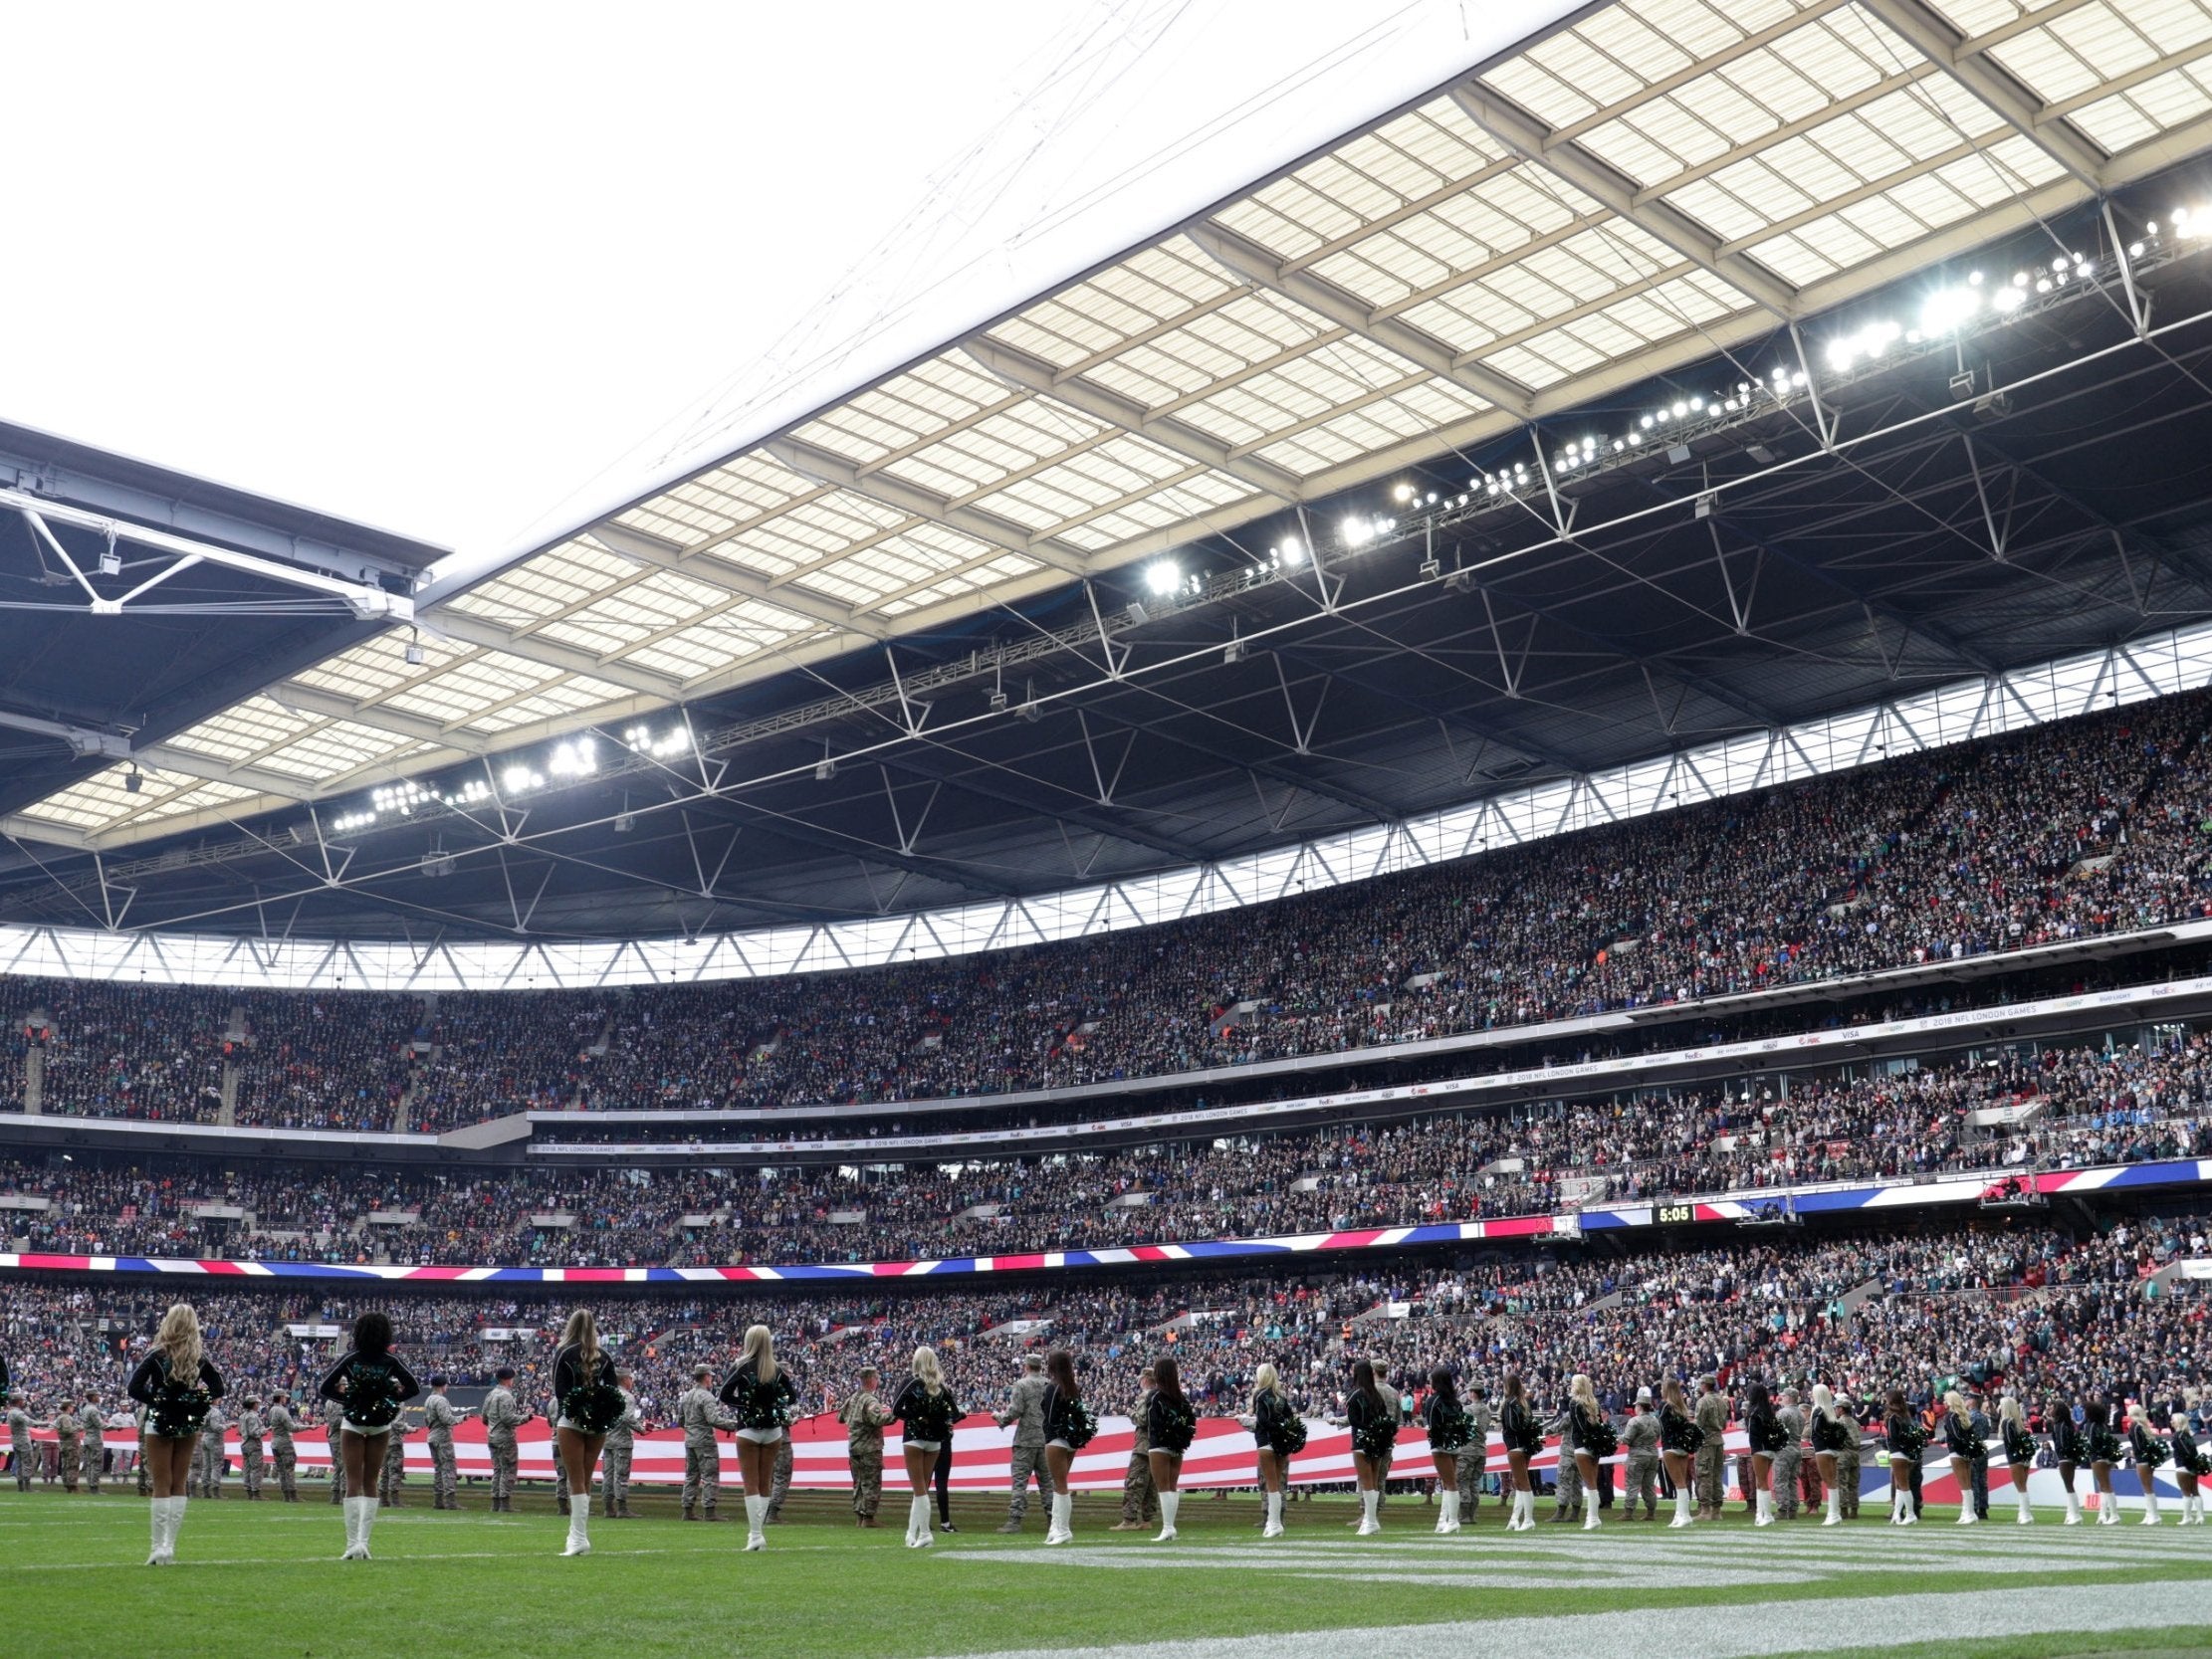 The NFL is growing in popularity in the UK